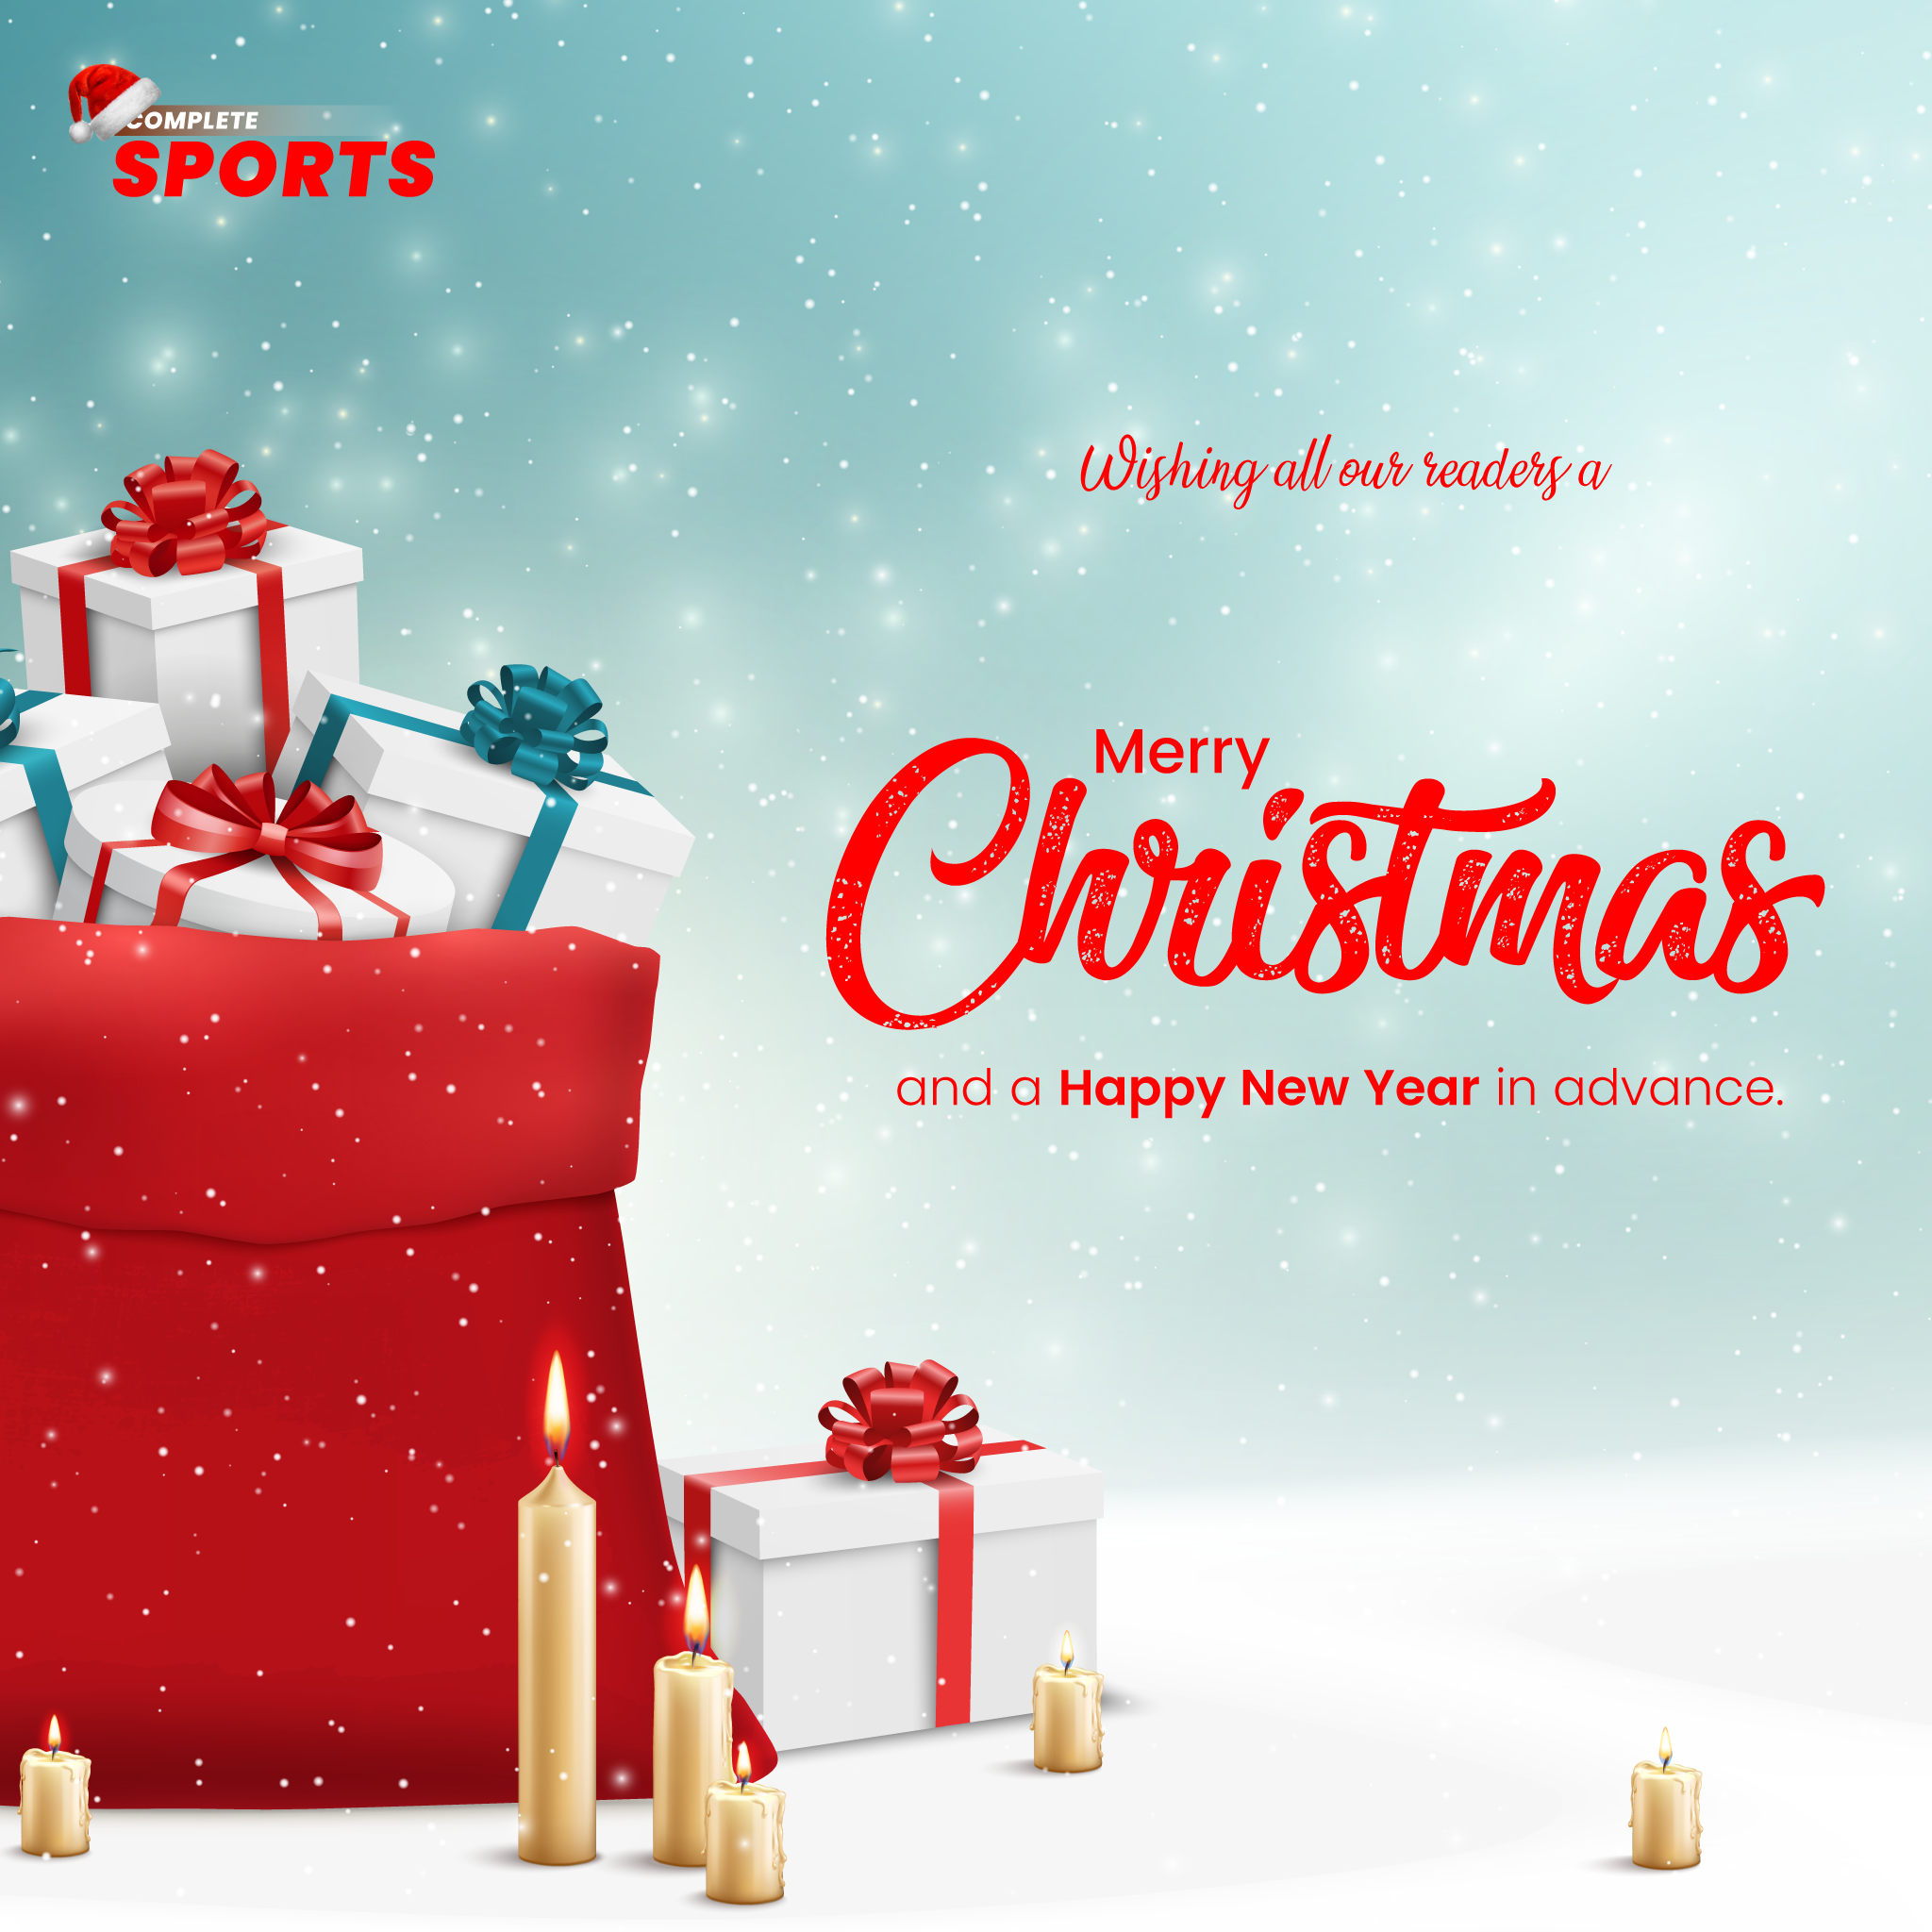 Merry Christmas And Happy New Year Ahead  –From Complete Sports